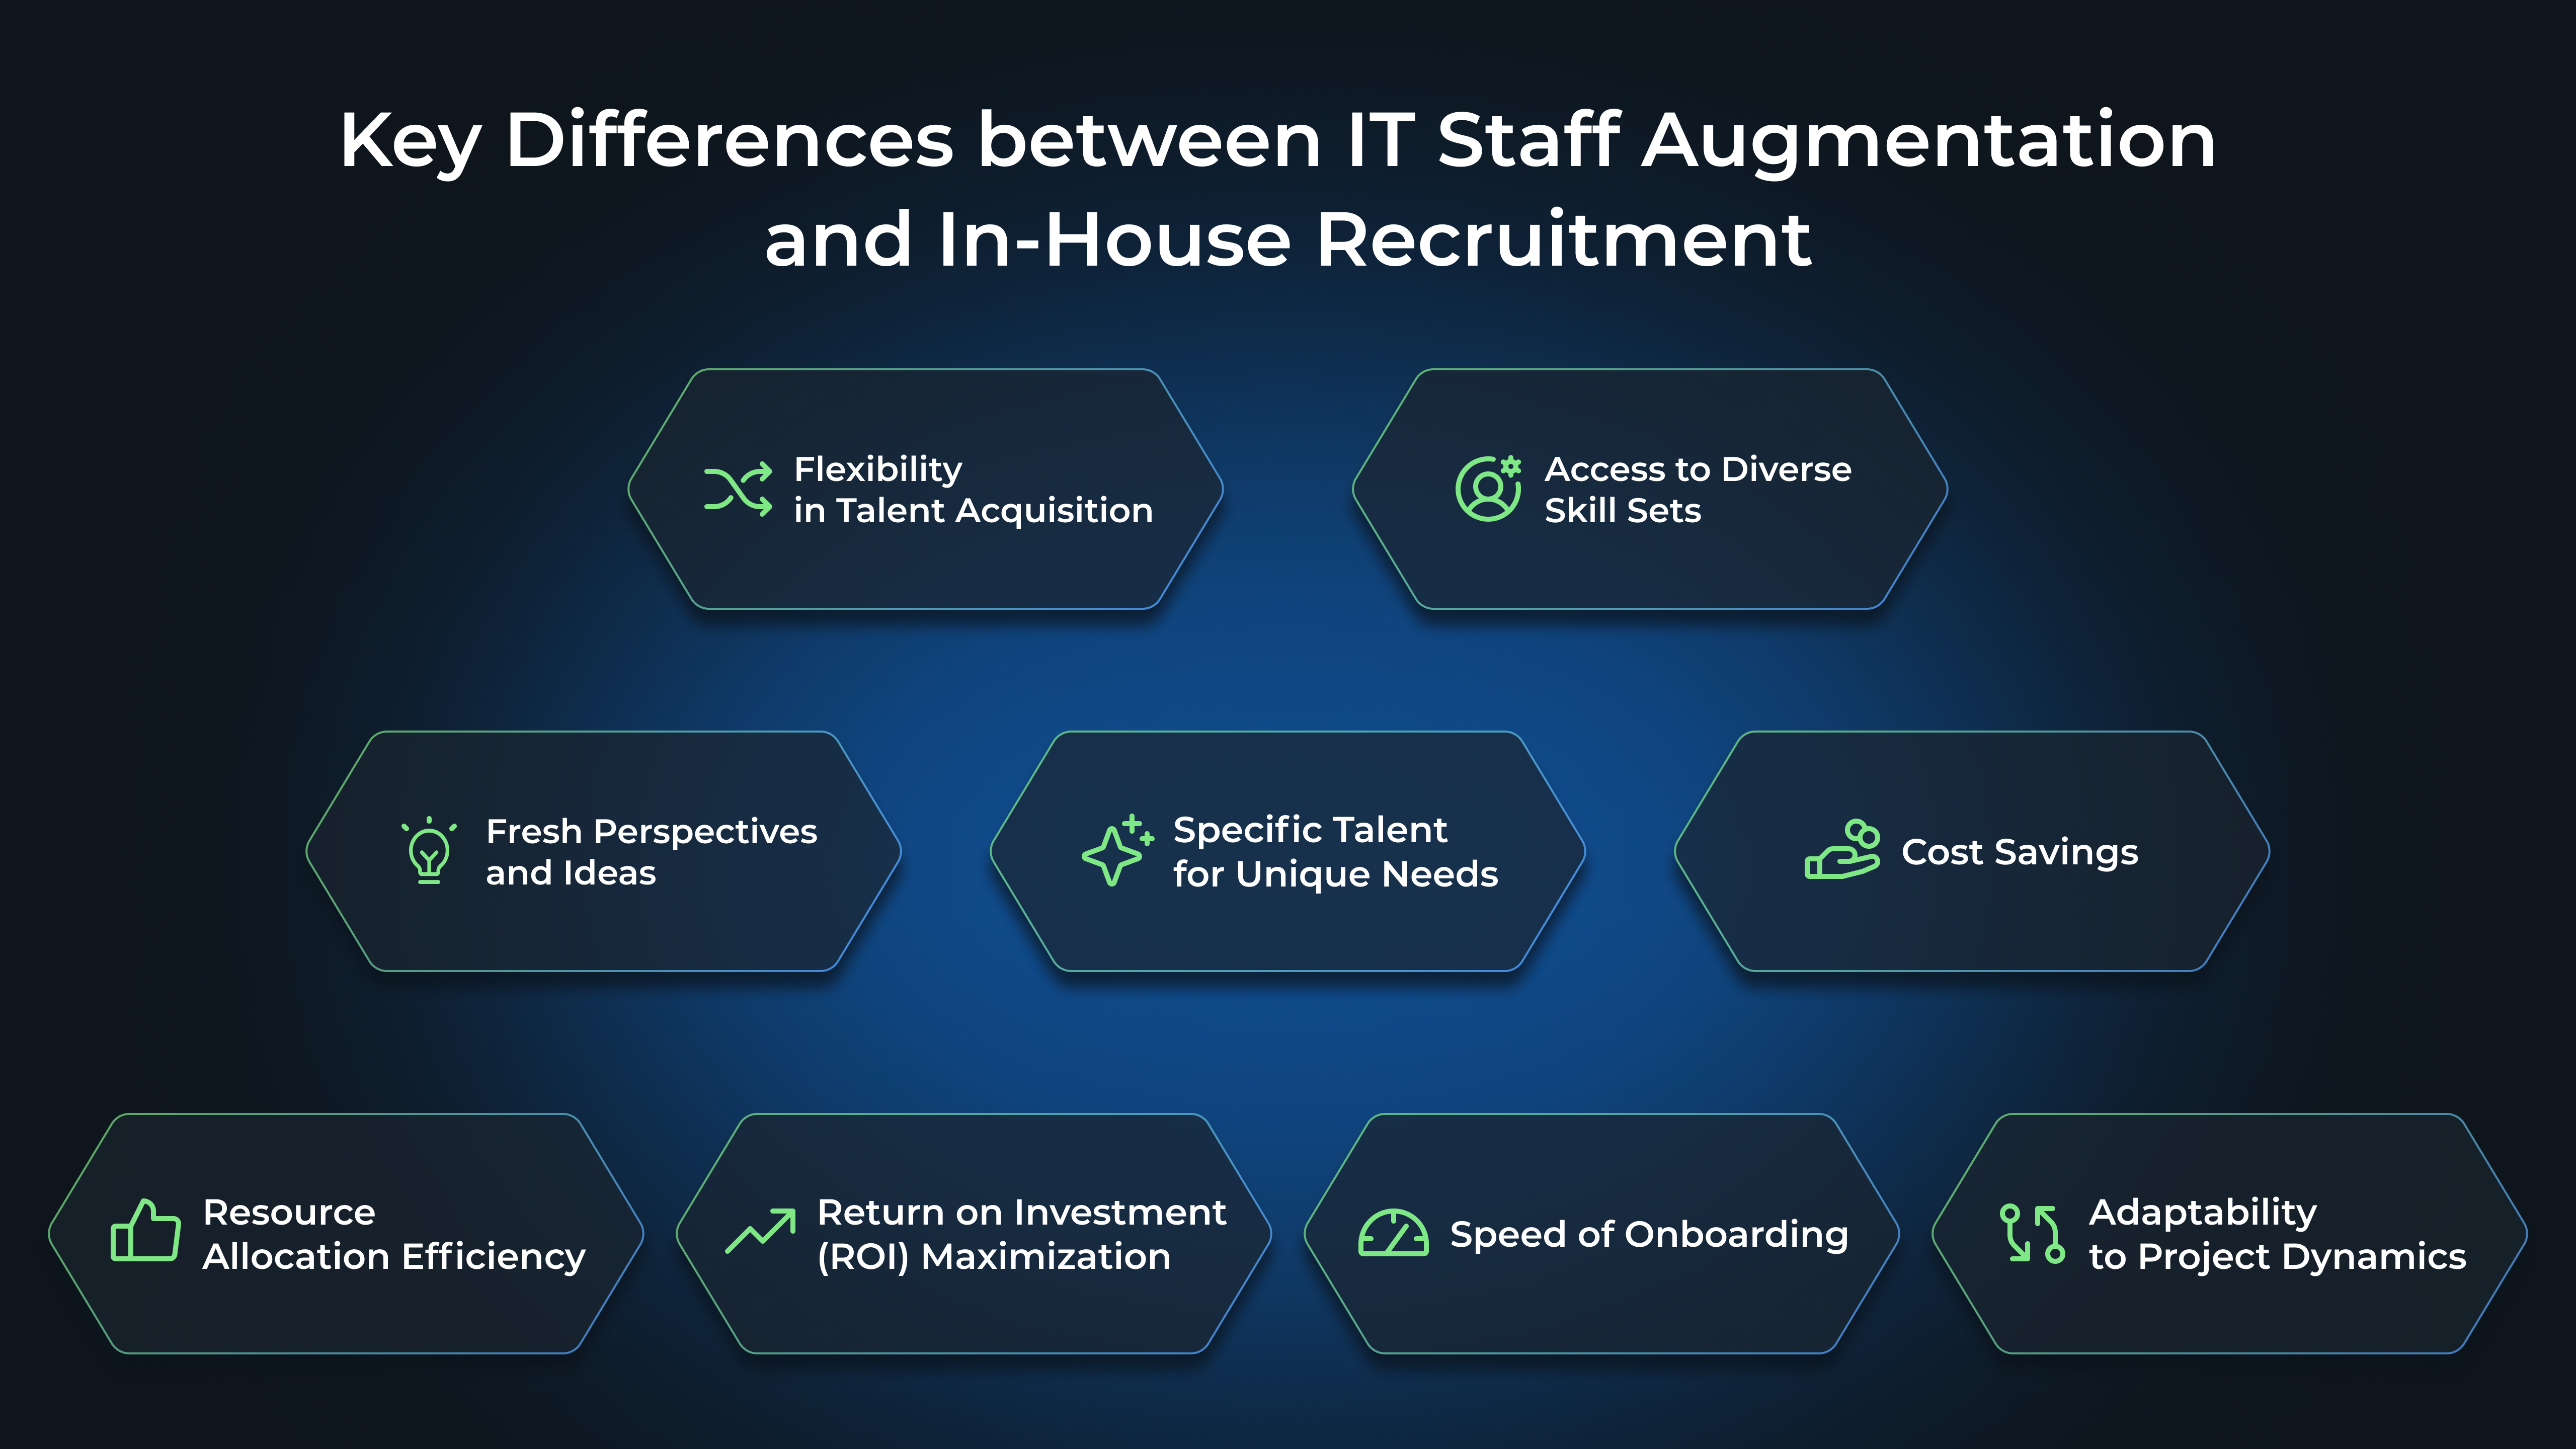 Key Differences between IT Staff Augmentation and In-House Recruitment: Flexibility in Talent Acquisition, Access to Diverse Skill Sets, Fresh Perspectives and Ideas, Specific Talent for Unique Needs, Cost Savings, Resource Allocation Efficiency, Return on Investment (ROI) Maximization, Speed of Onboarding, Adaptability to Project Dynamics
